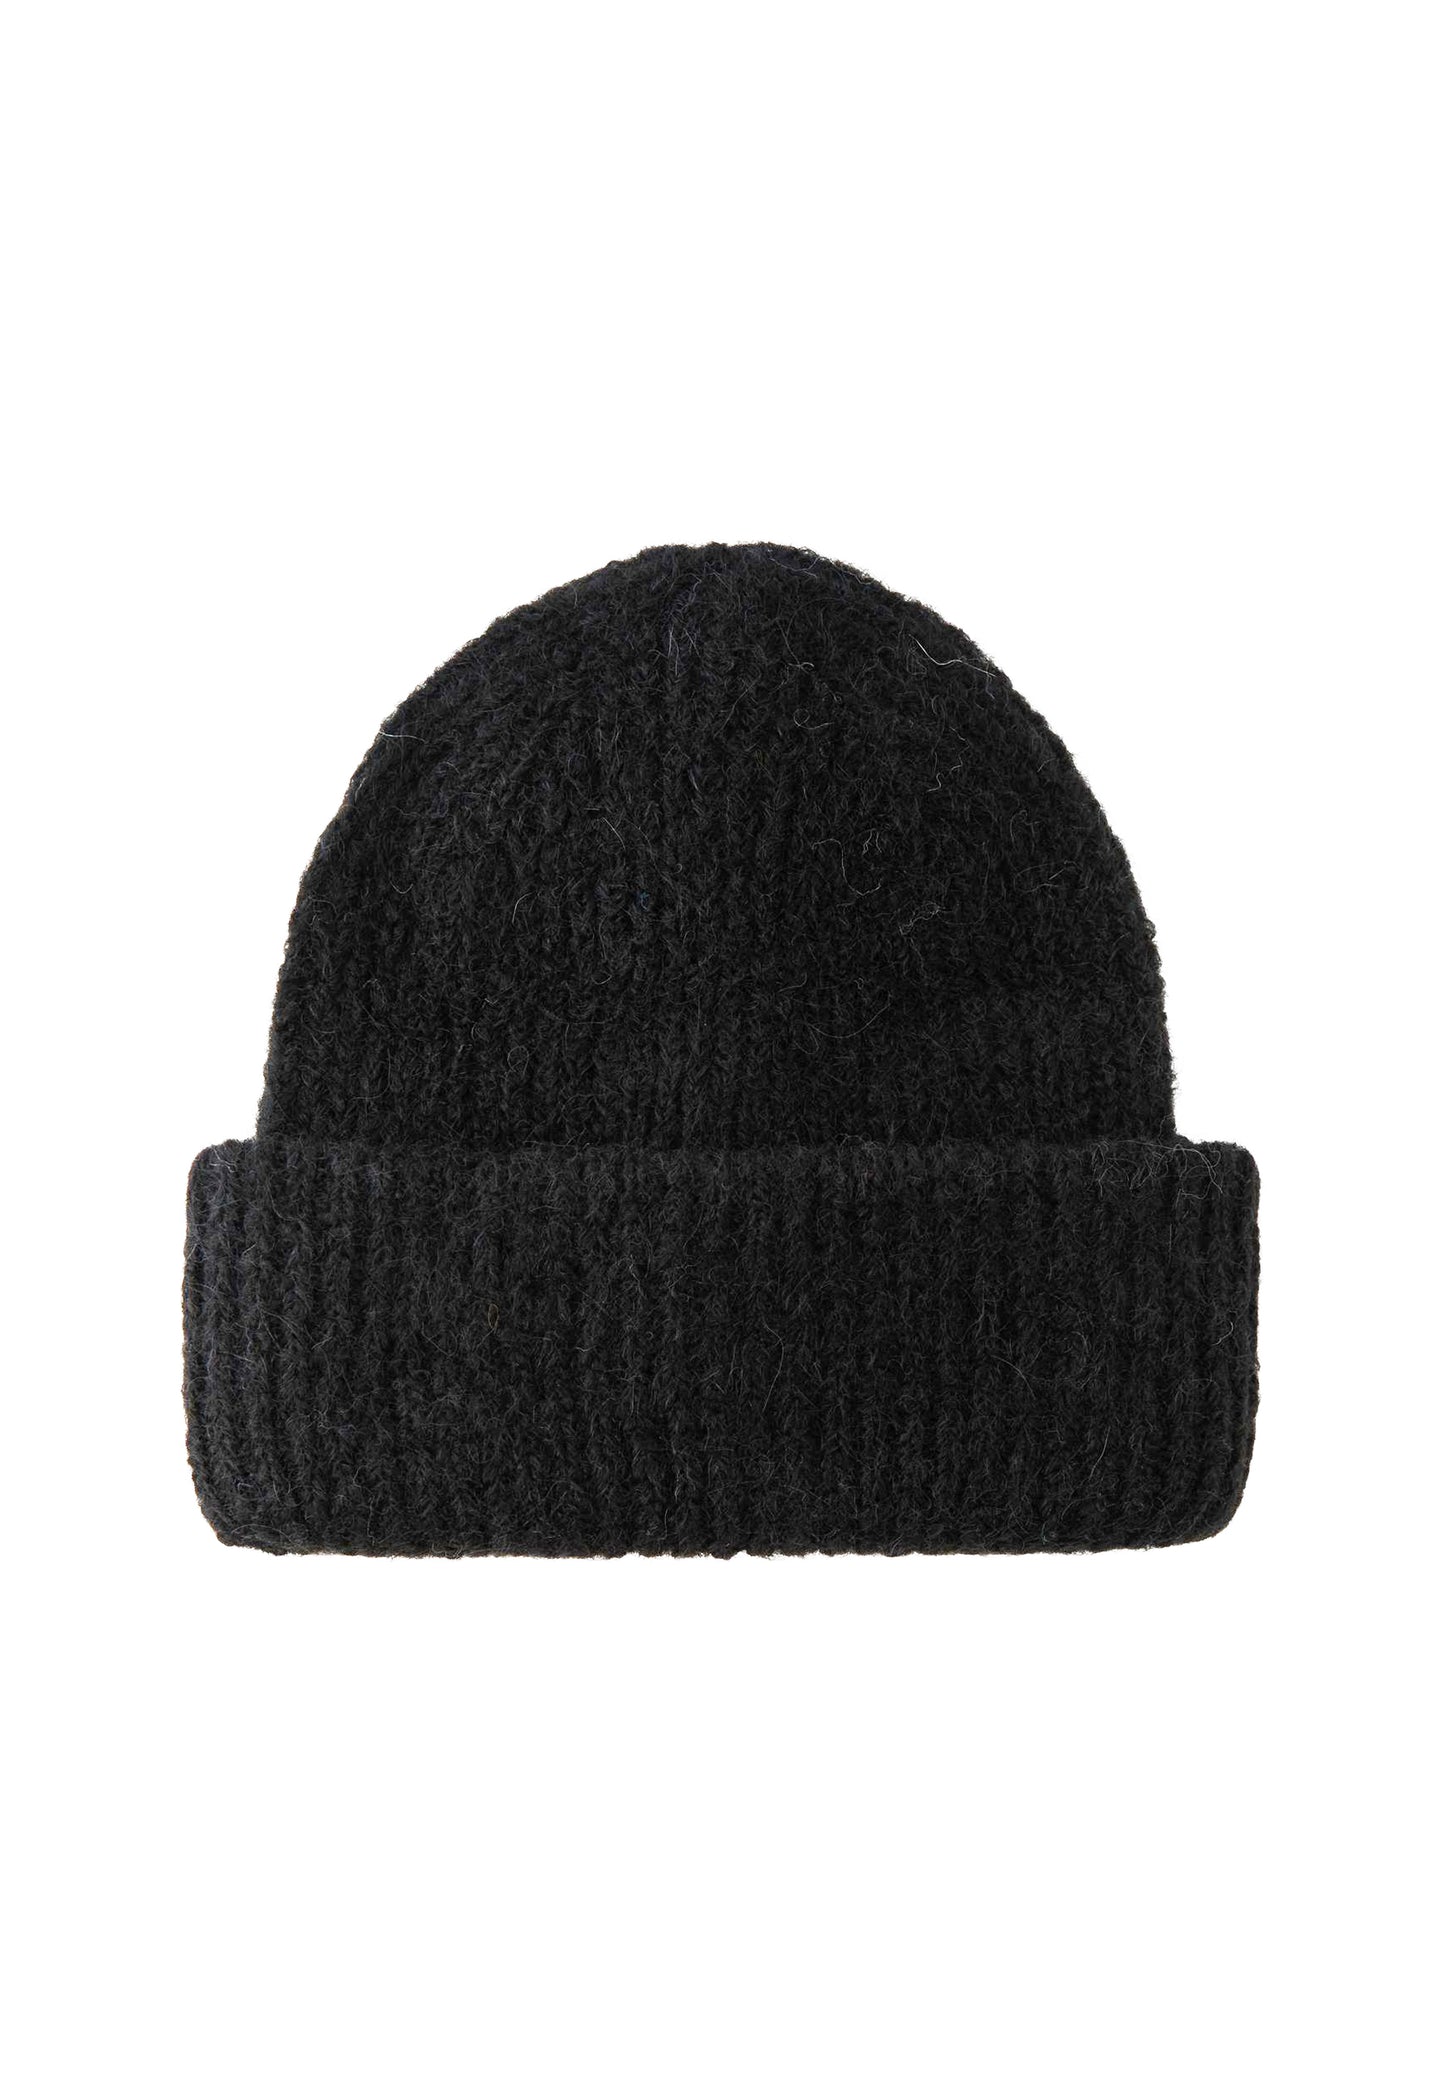 PIECES Fluffy Knit Ribbed Turn Up Beanie Hat in Black - One Nation Clothing